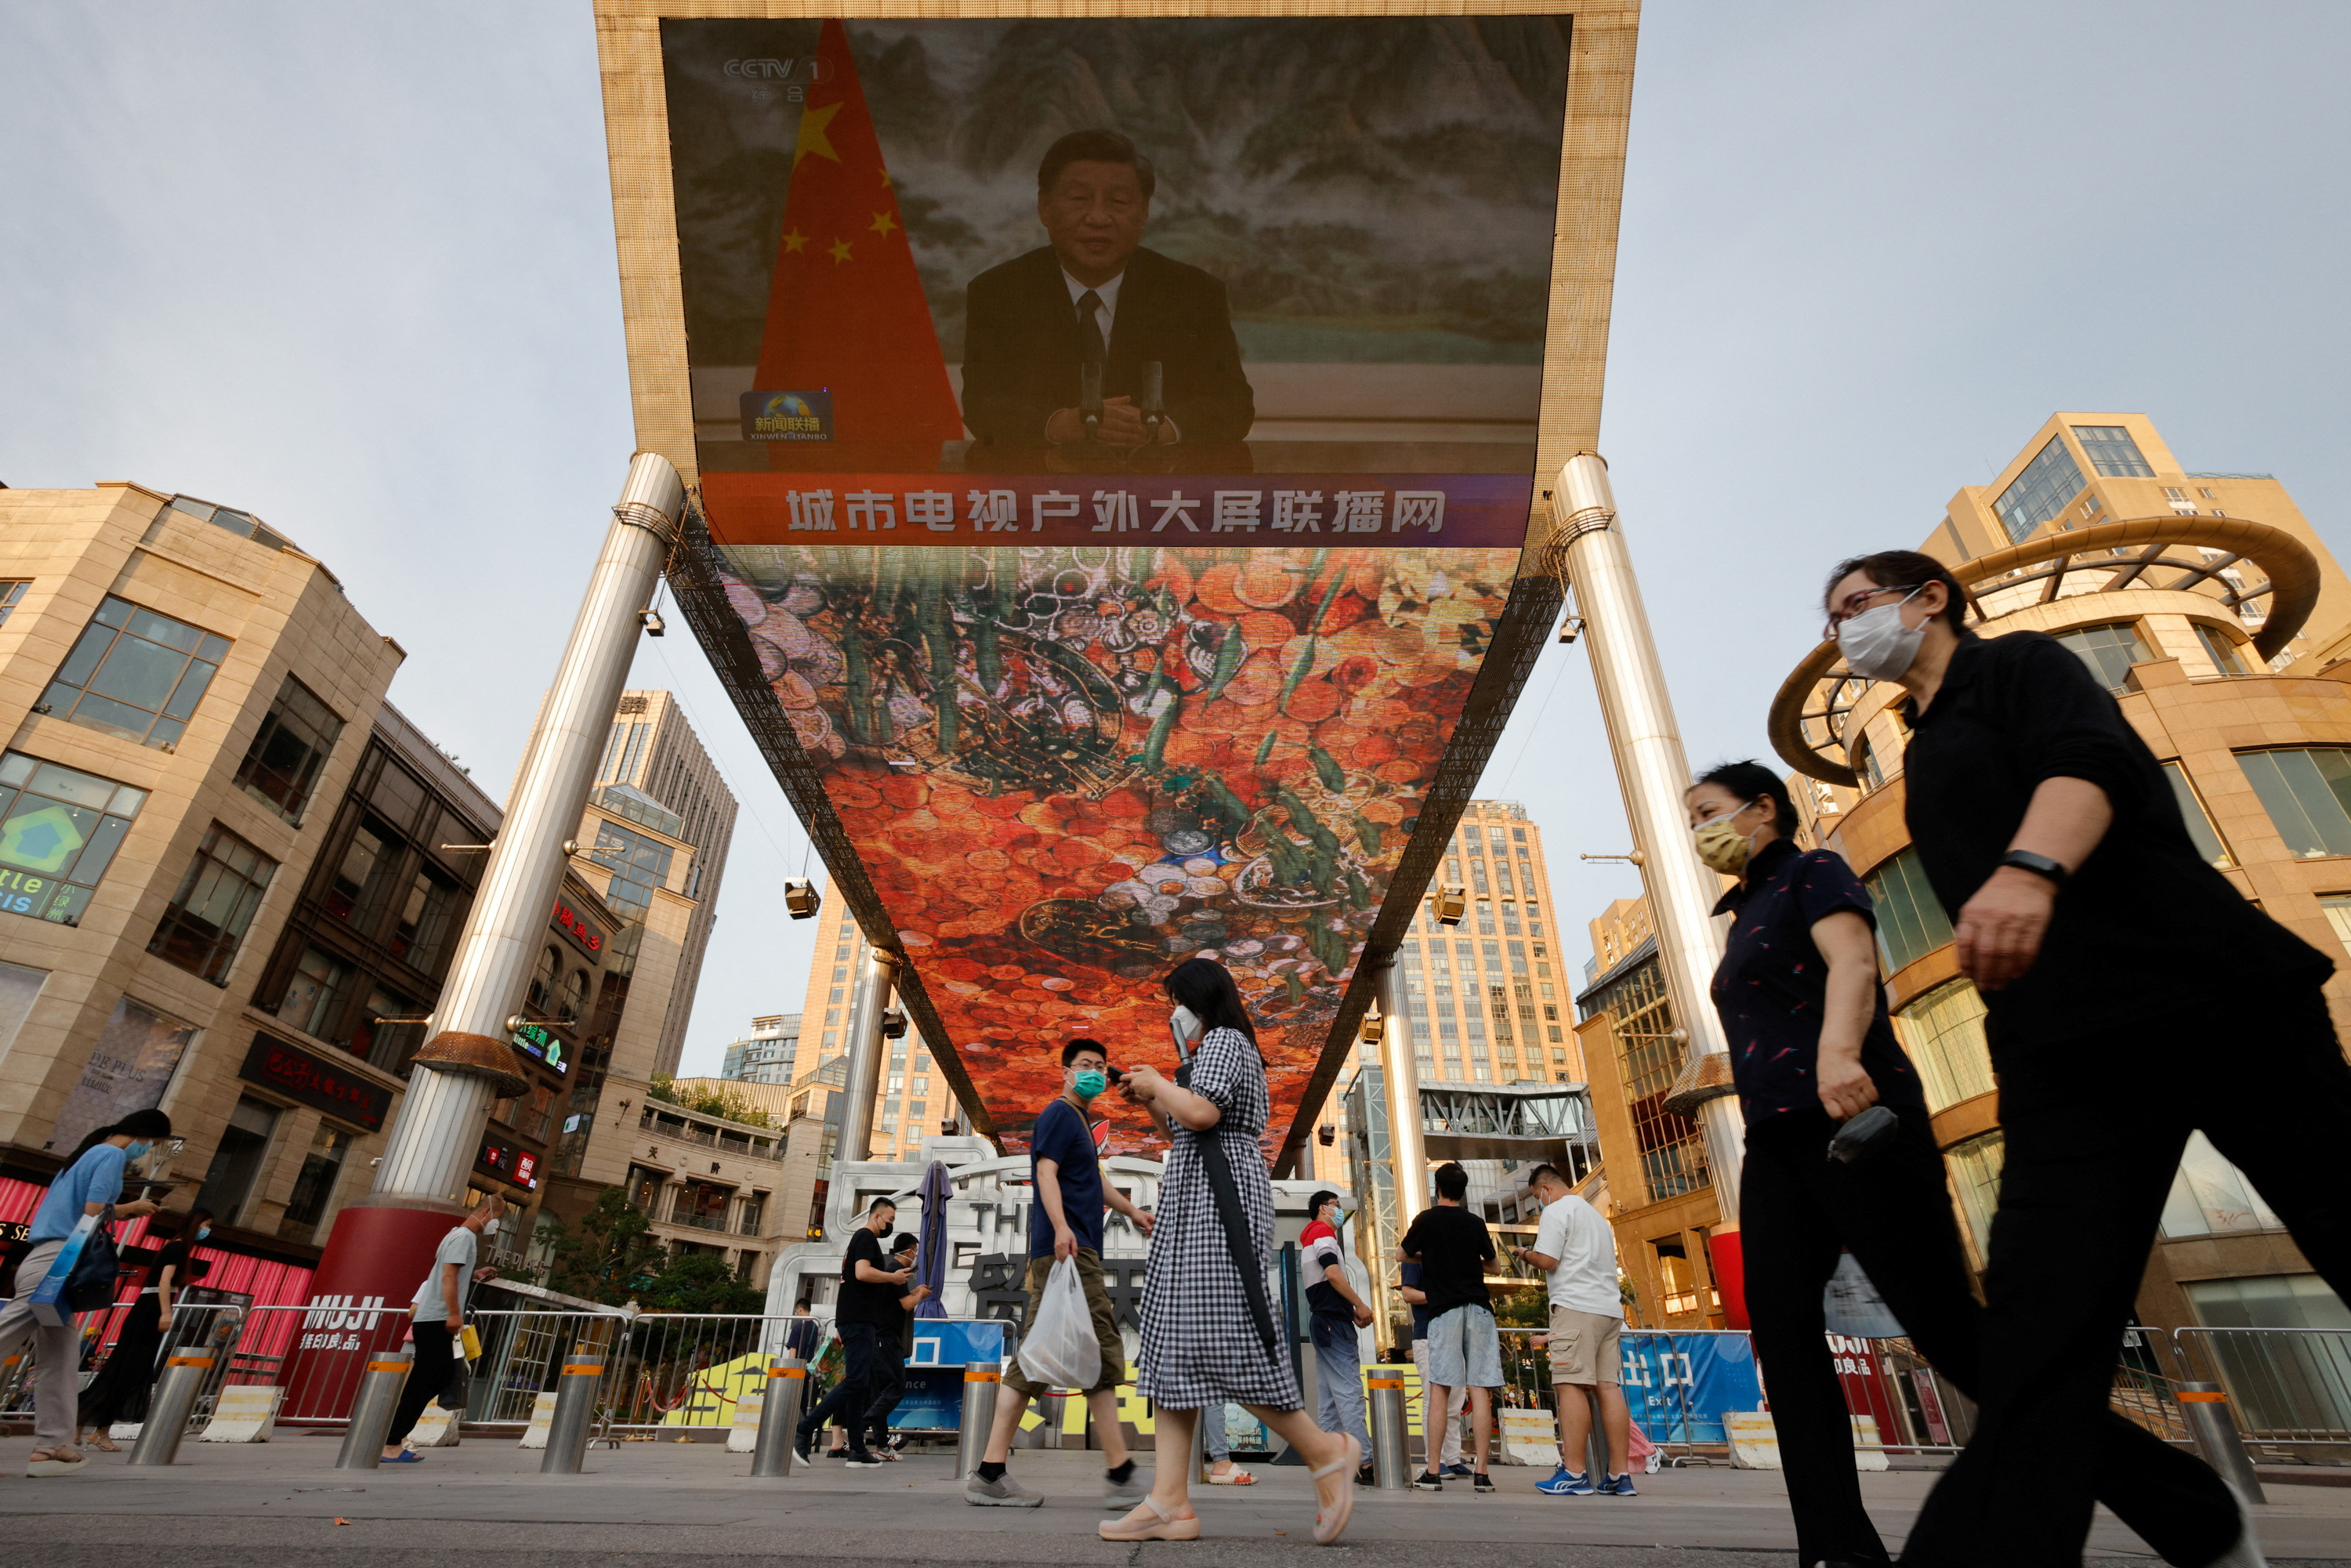 A screen shows a CCTV state media news broadcast of Chinese President Xi Jinping, addressing the BRICS Business Forum via video link, at a shopping center in Beijing